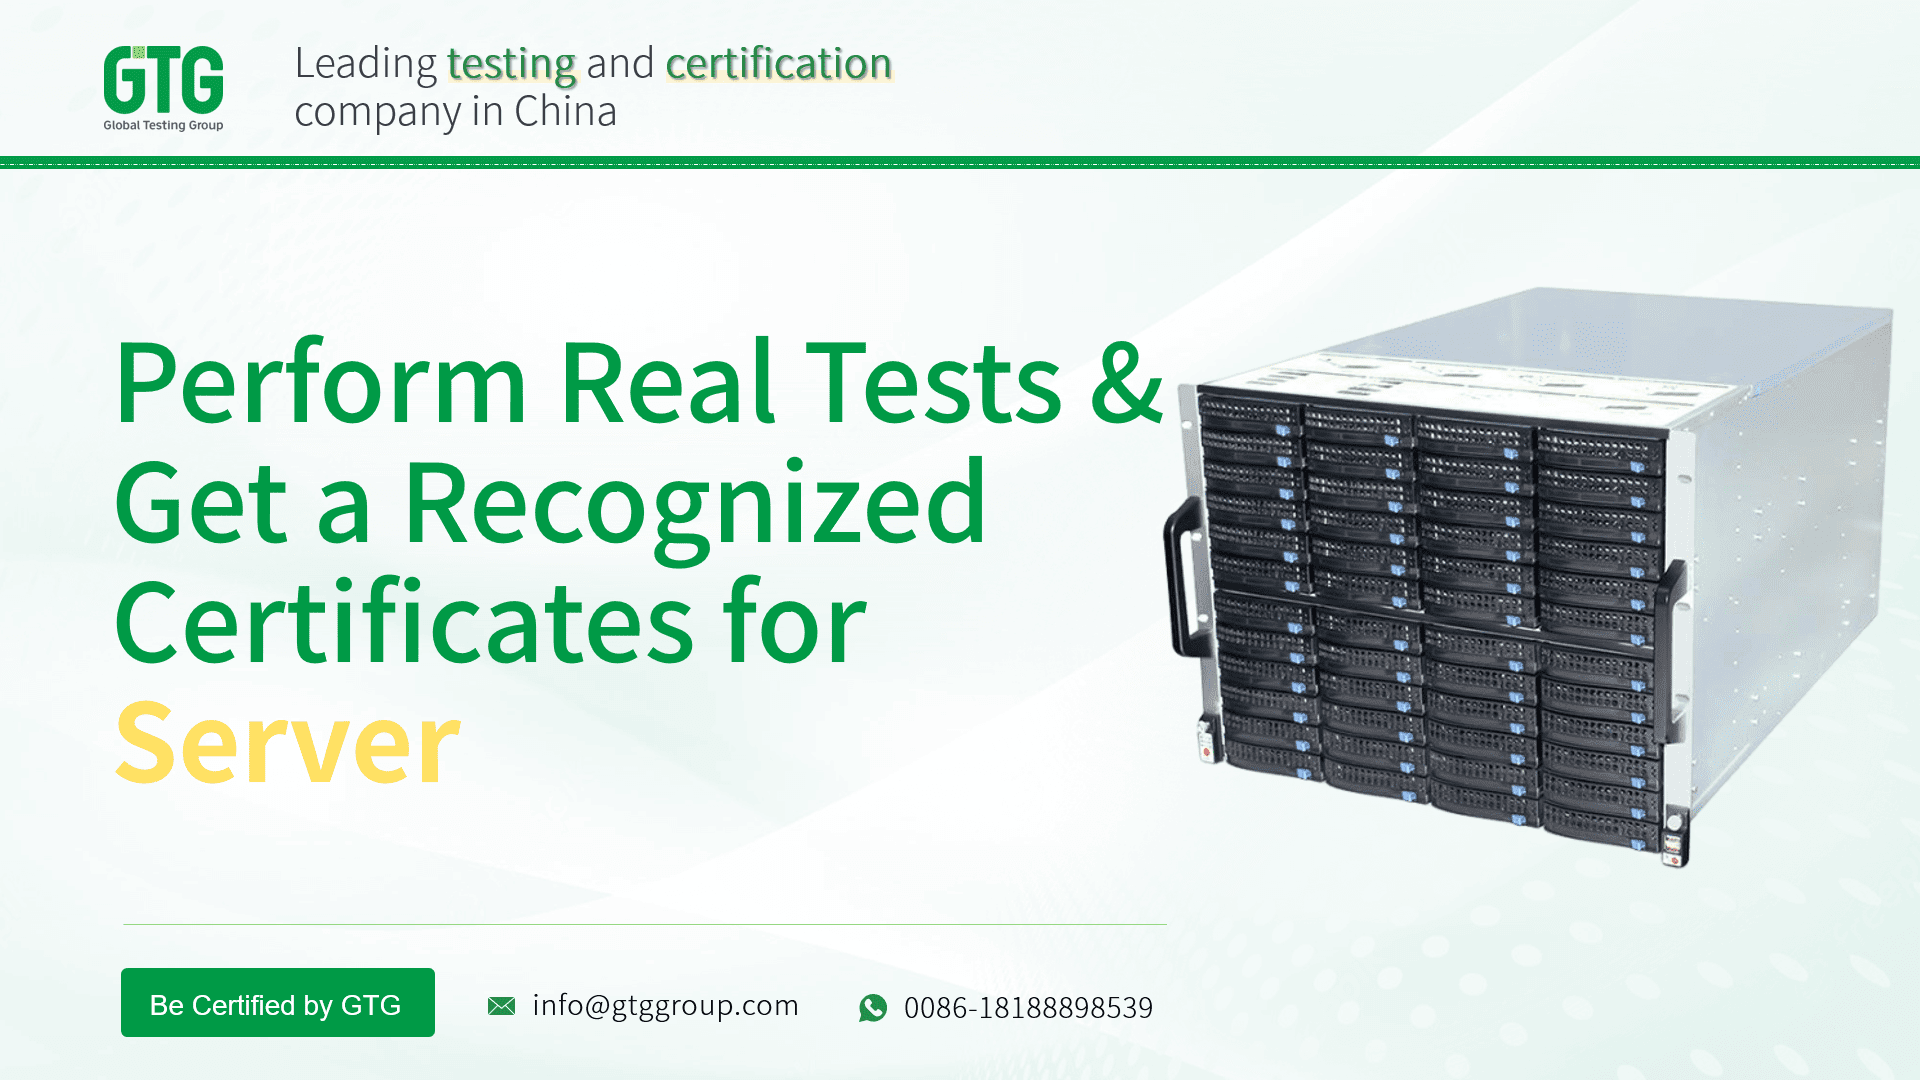 Get Test Report and Certifications for Server from GTG Group